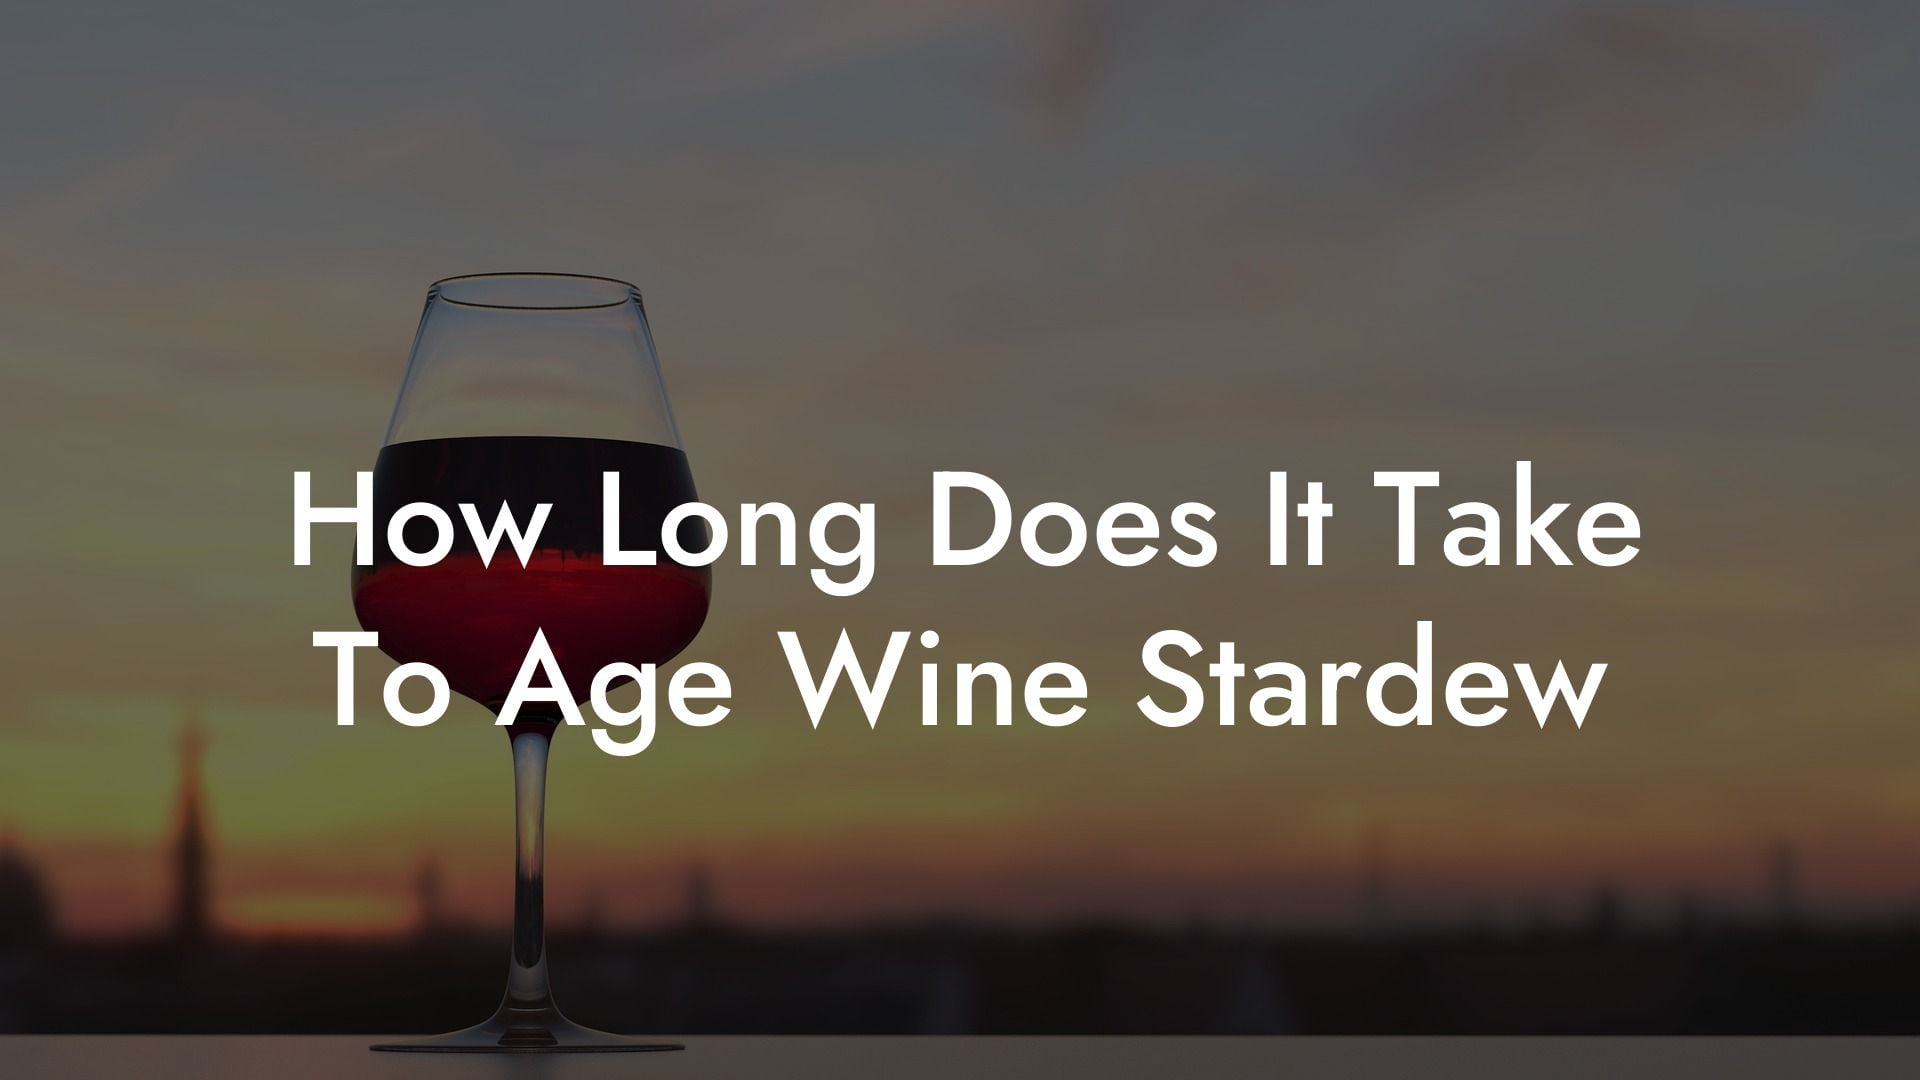 How Long Does It Take To Age Wine Stardew